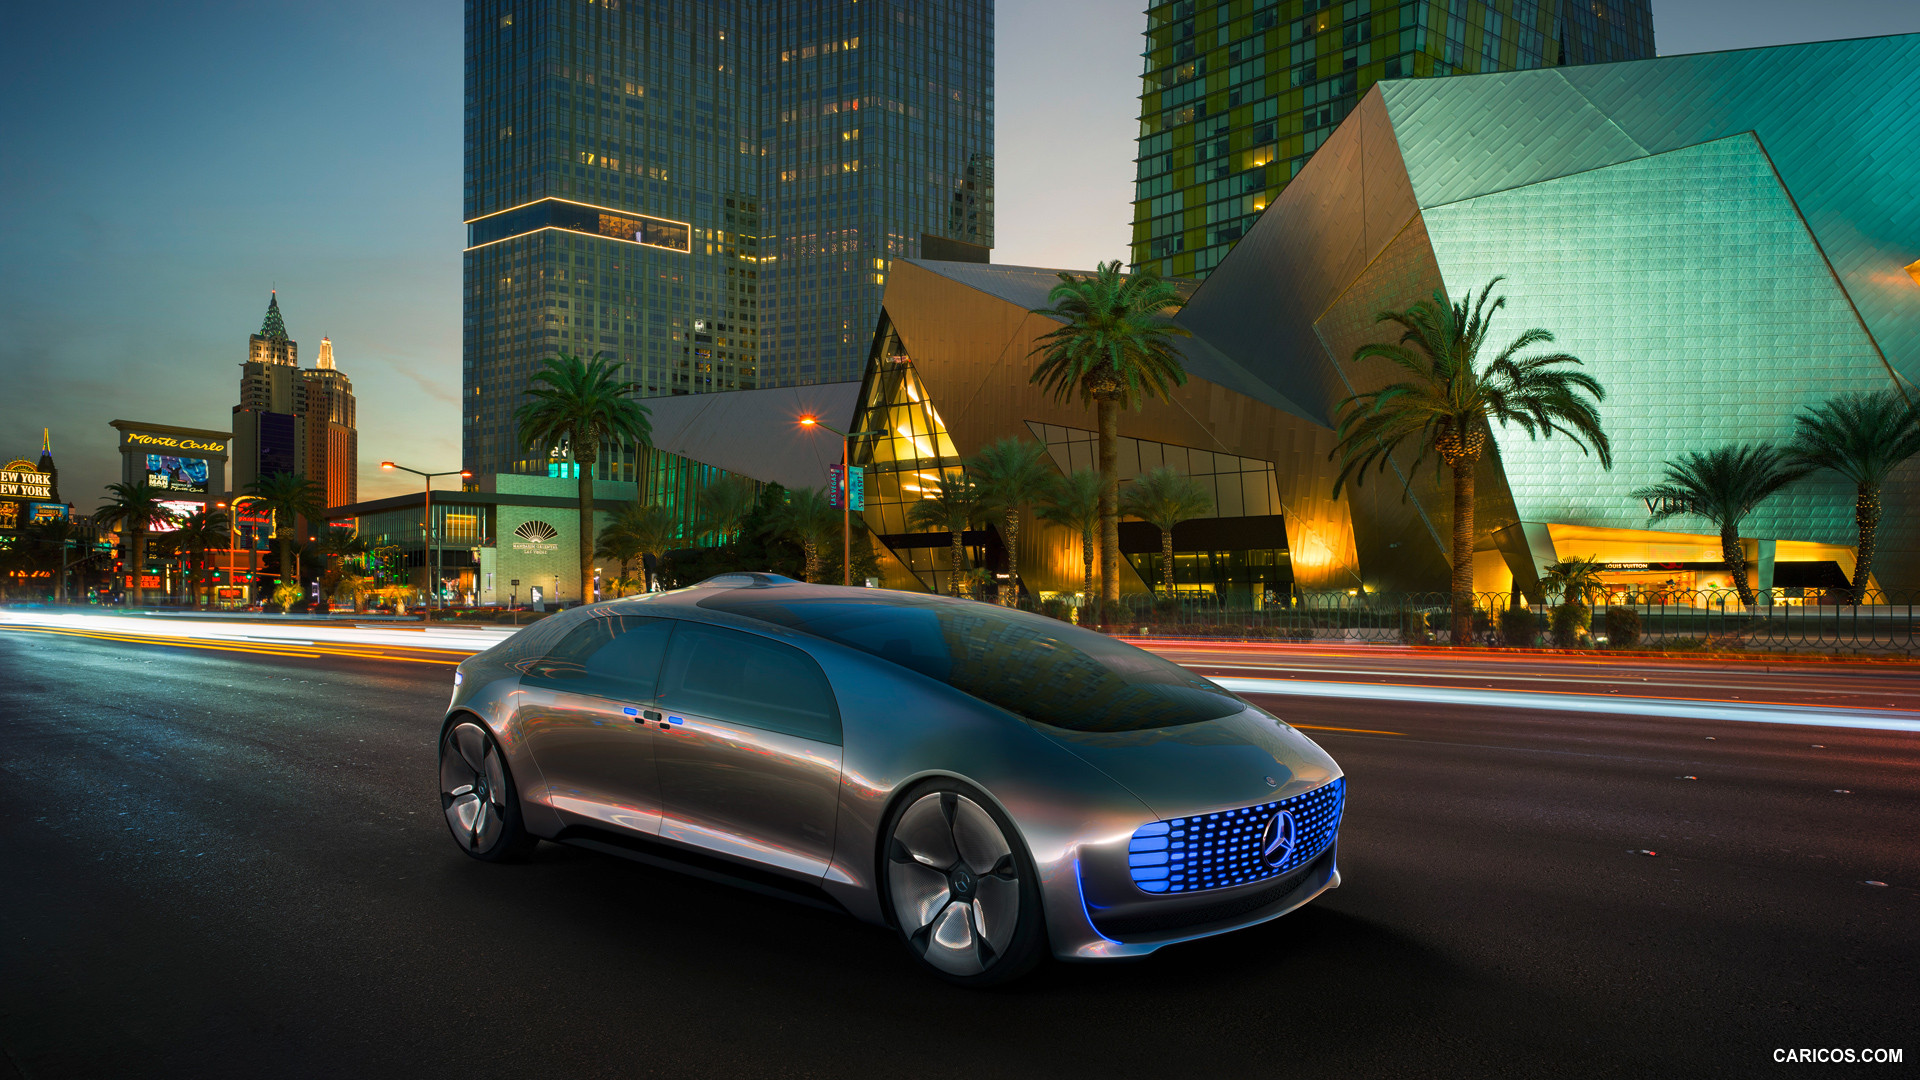 2015 Mercedes-Benz F 015 Luxury in Motion Concept  - Front, #9 of 92